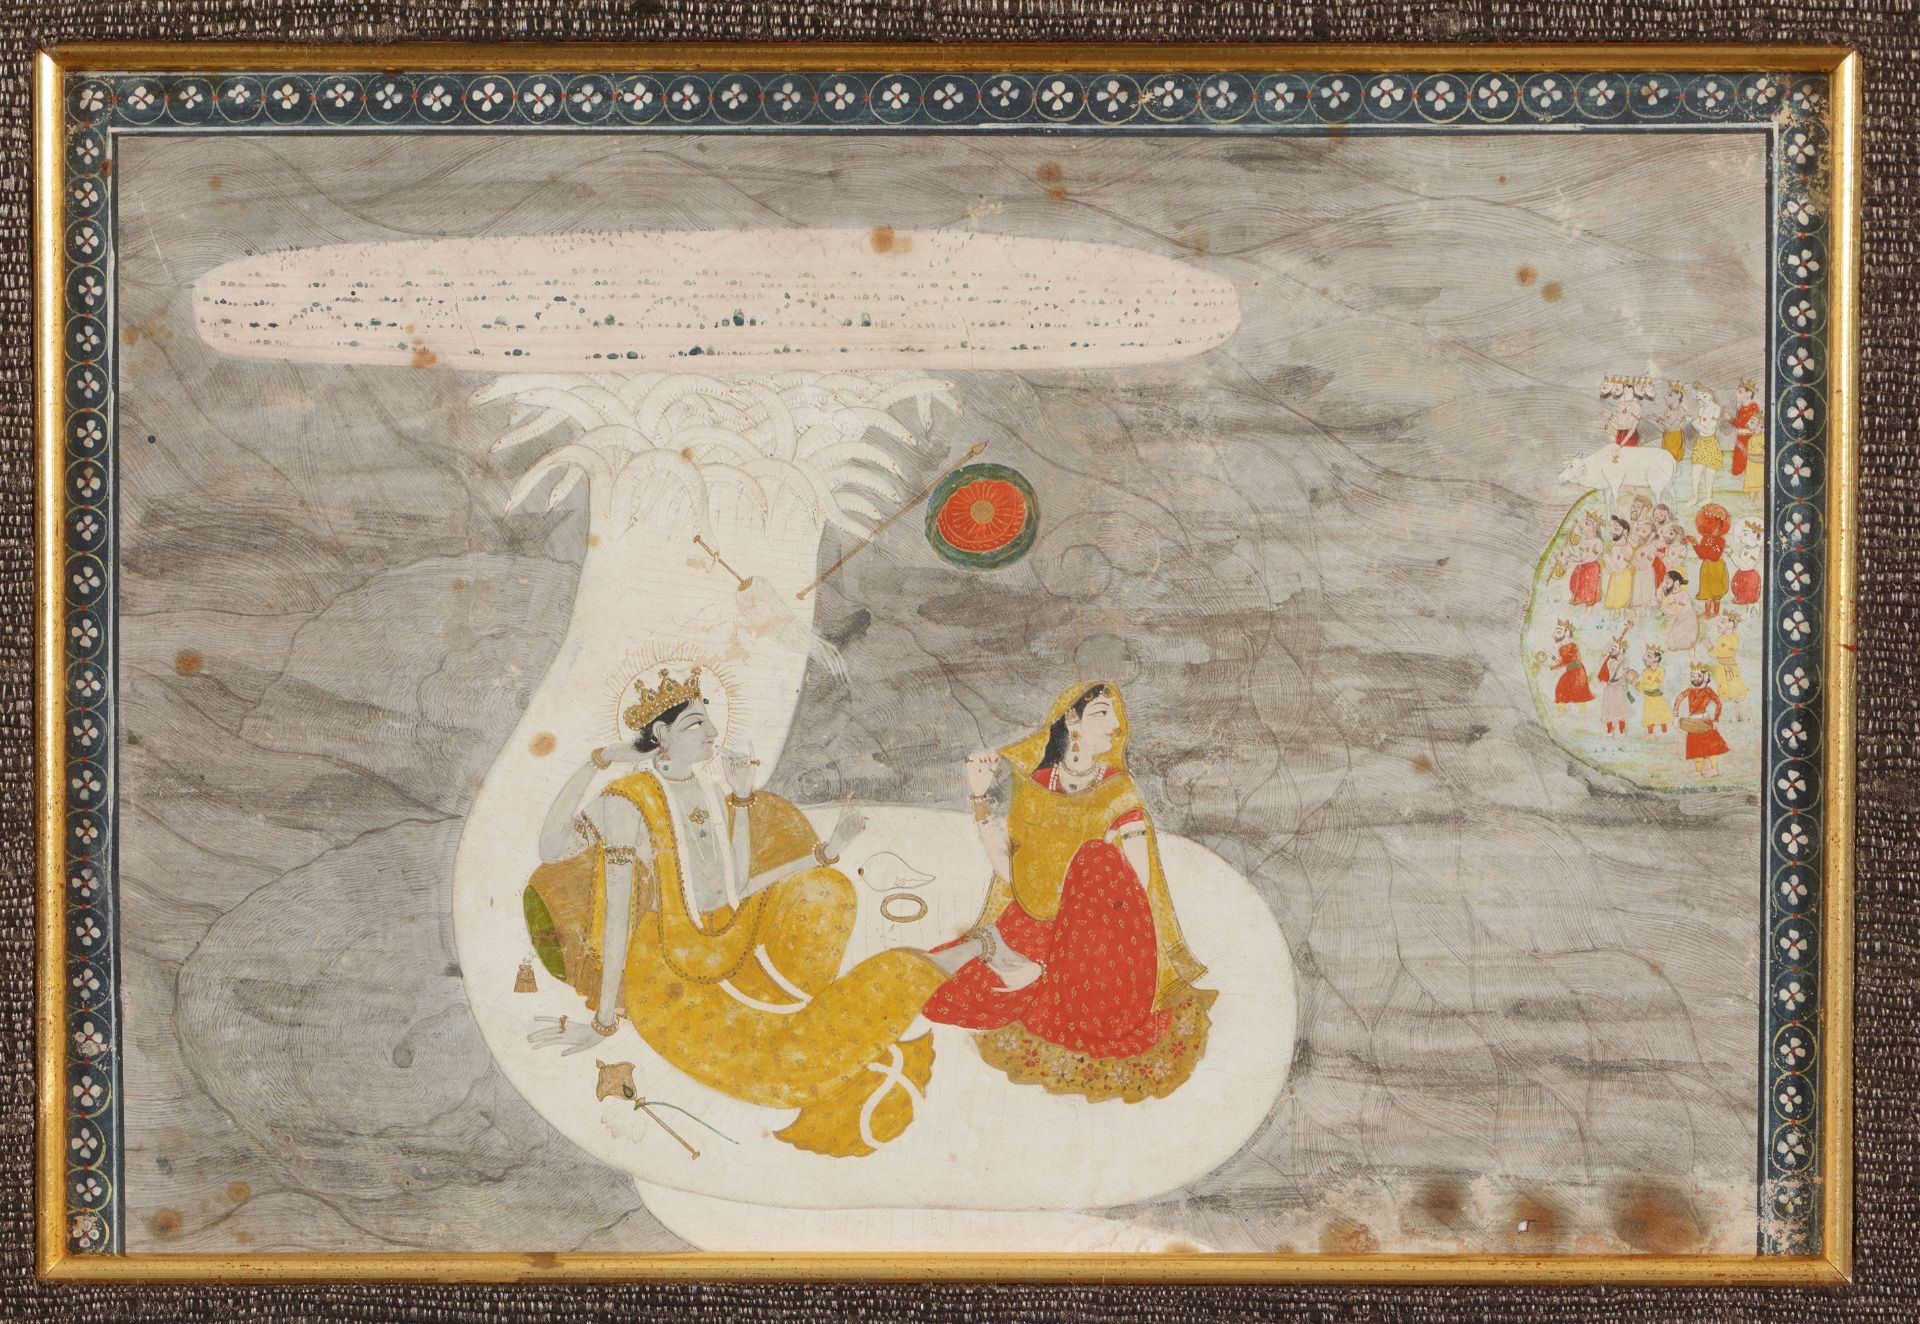 Anonymous Pahari painter. Northern India, Punjab Hills. Late 18th/early 19th century - Image 2 of 3